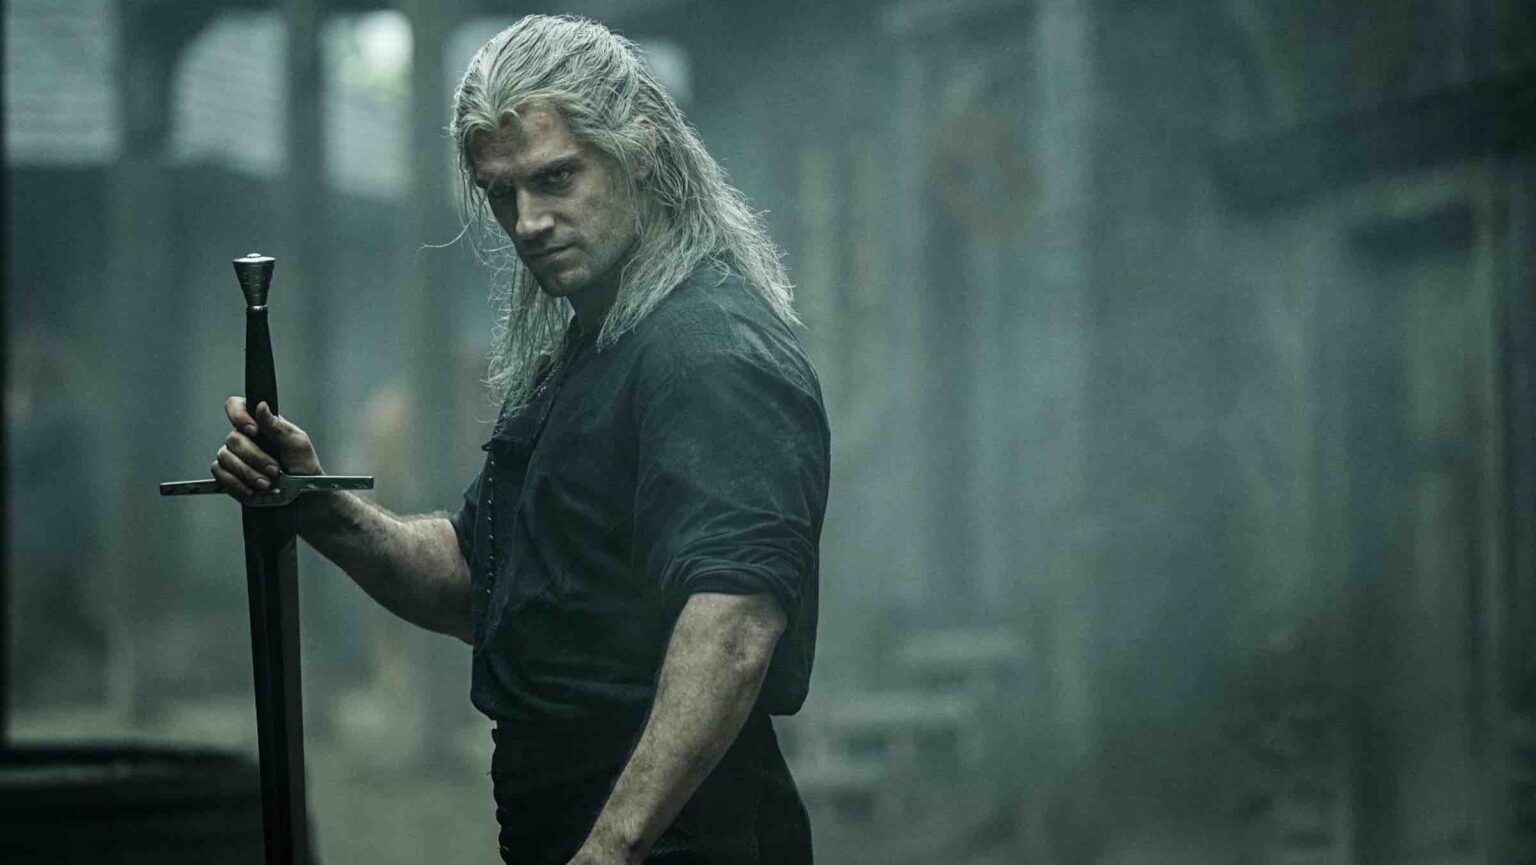 Netflix has announced that 'The Witcher' would be getting a prequel series. What does this mean for season 2? Here's what you need to know.